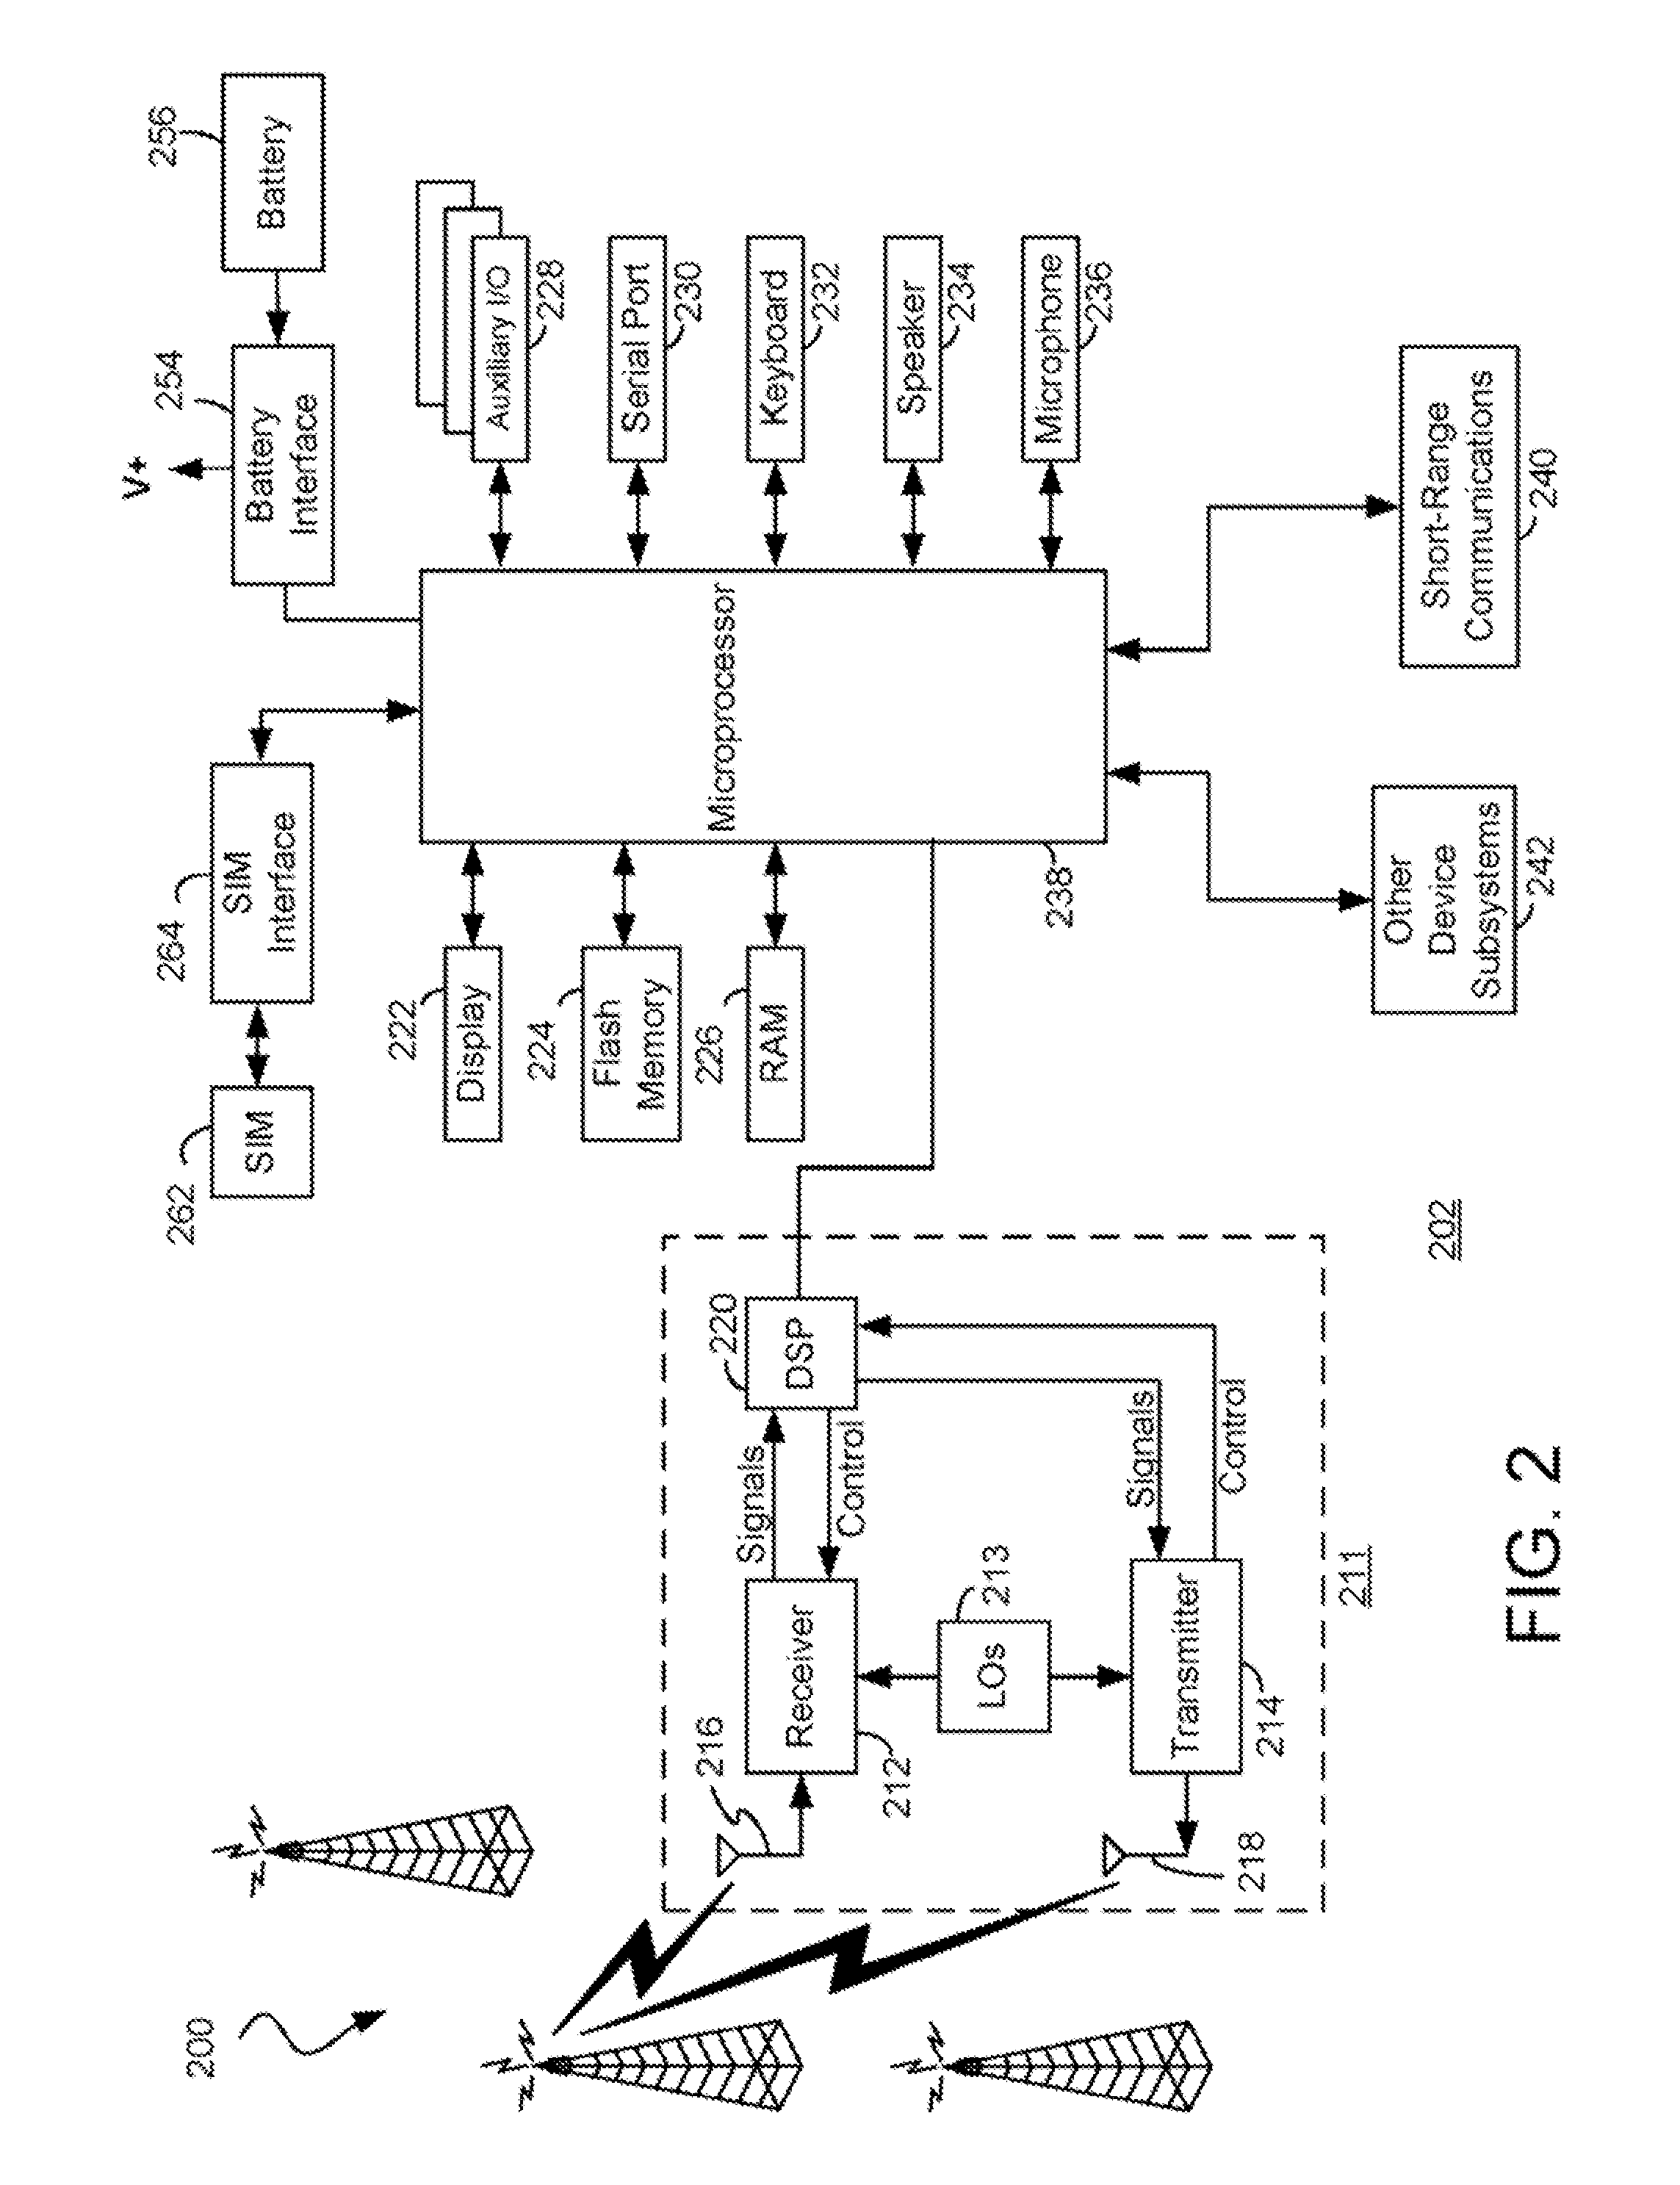 Methods And Apparatus For Associating Mapping Functionality And Information In Contact Lists Of Mobile Communication Devices